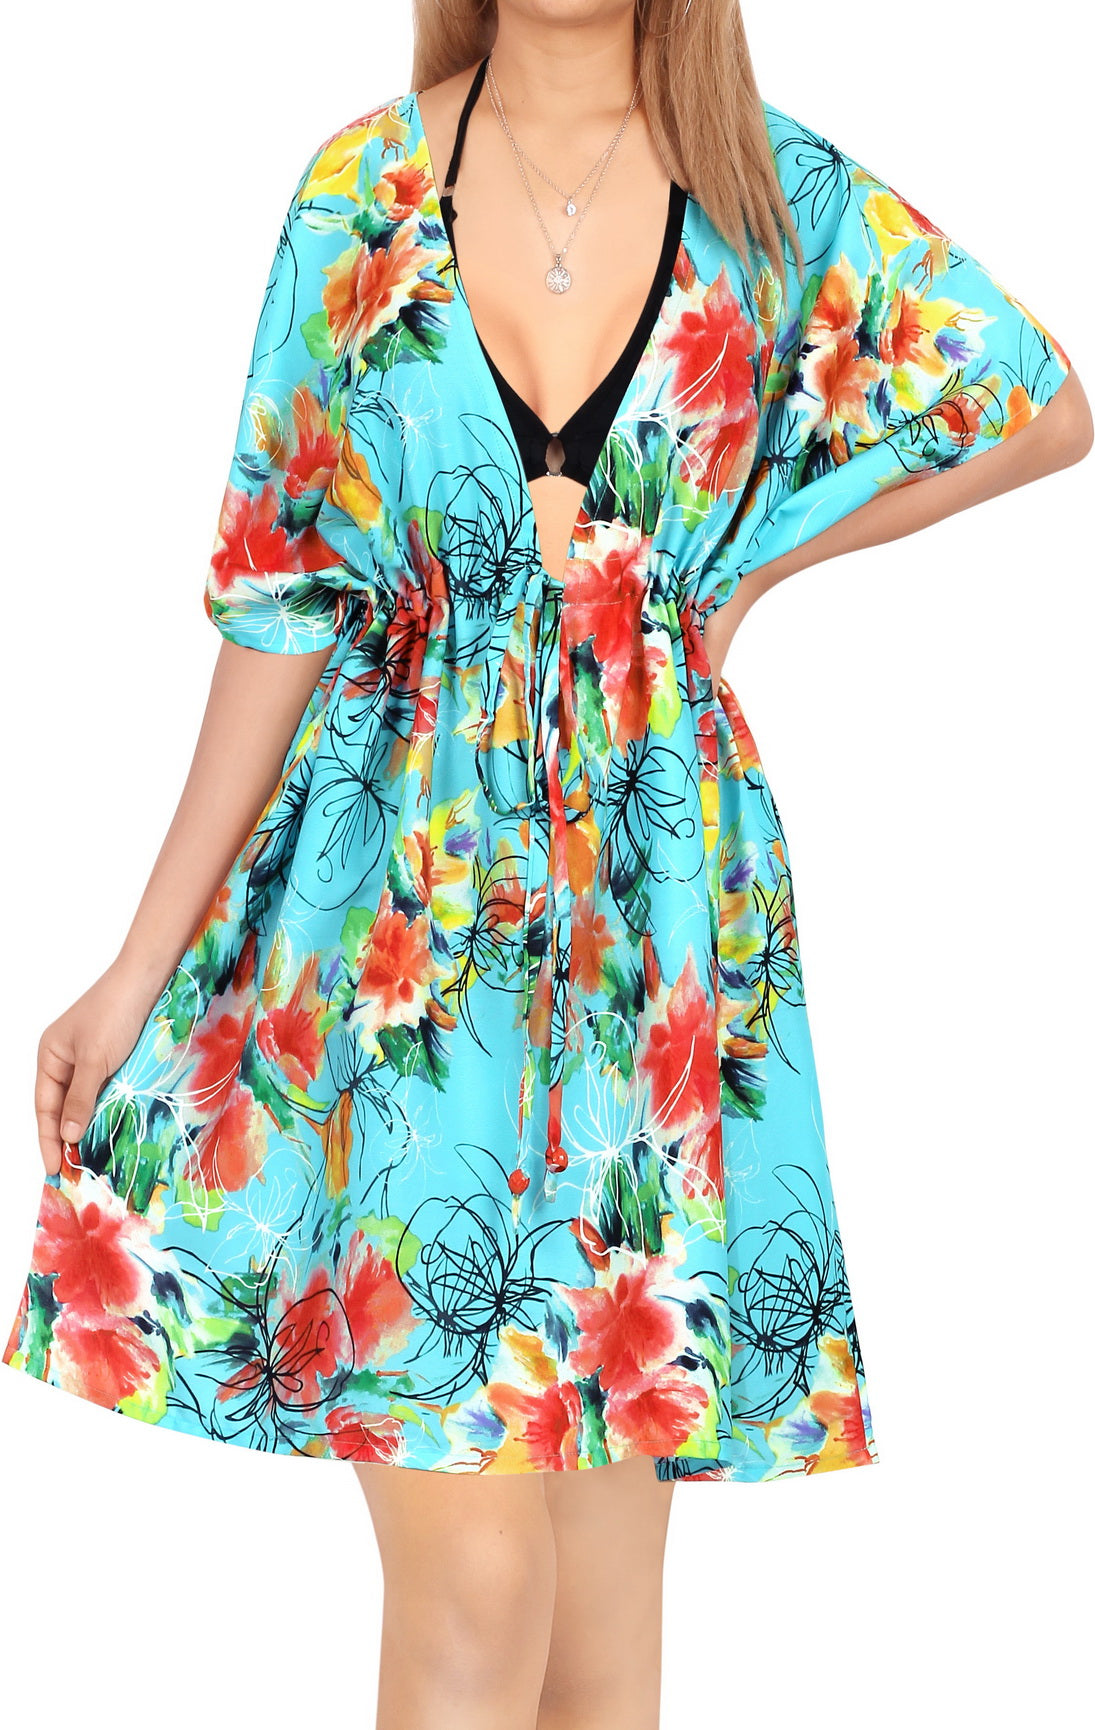 woman posing in deep v neck aqua colored coverup with hawaiian spring print